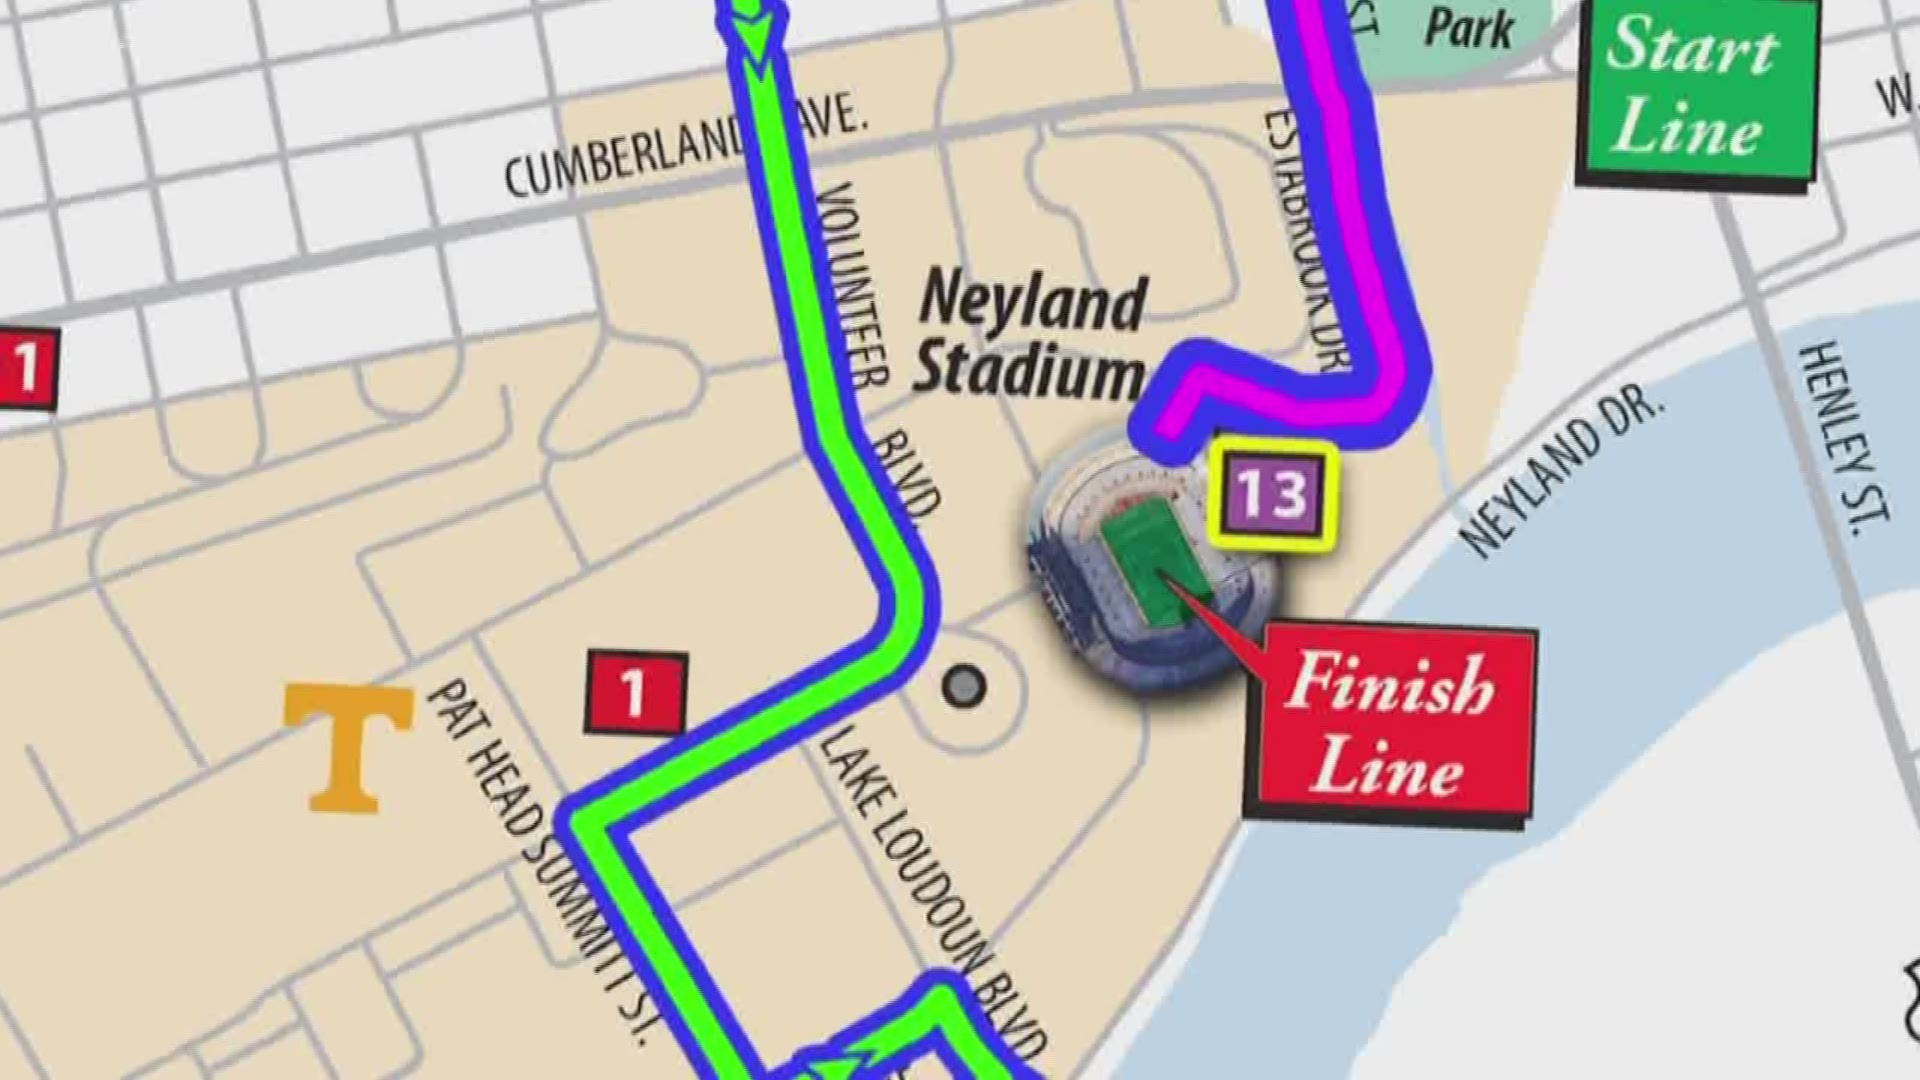 Runners will enjoy a scenic 26.2 mile tour of Knoxville. Here's a closer look at the course.